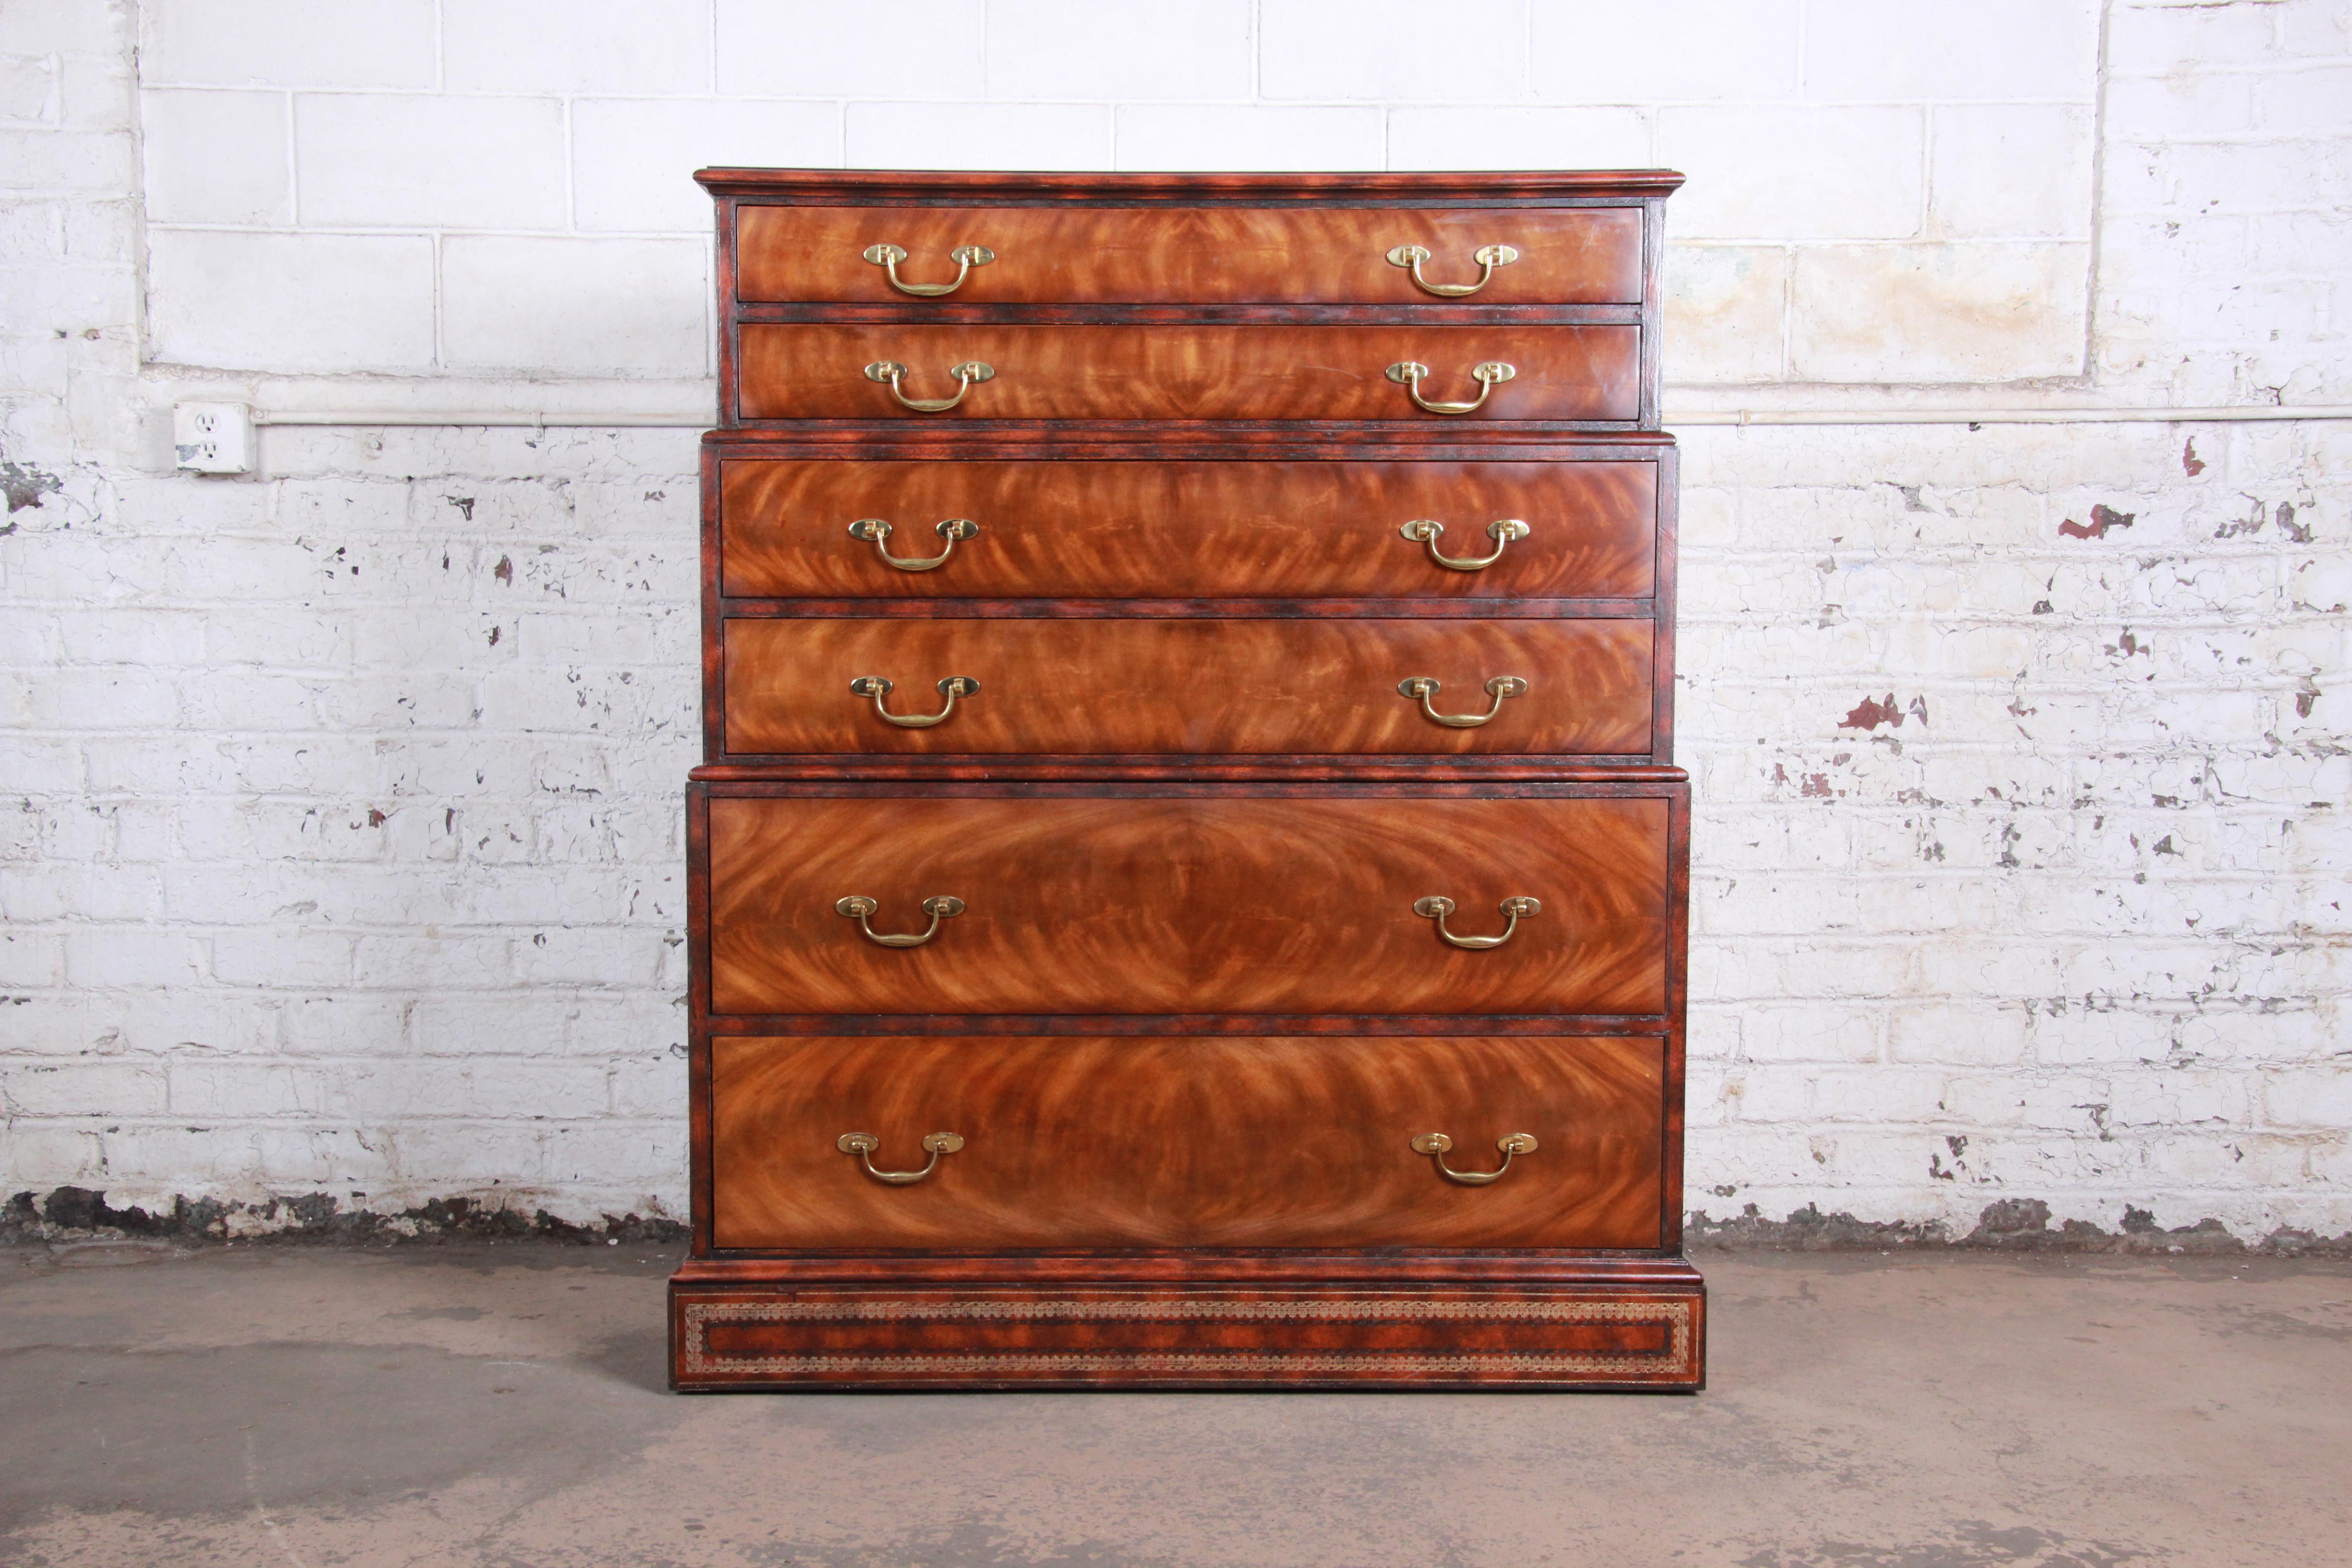 An exceptional chest on chest highboy dresser by Maitland Smith. The dresser features stunning flame mahogany wood grain with a beautiful tooled leather top, sides, and base. It offers ample storage, with six drawers. Brass hardware is original, and